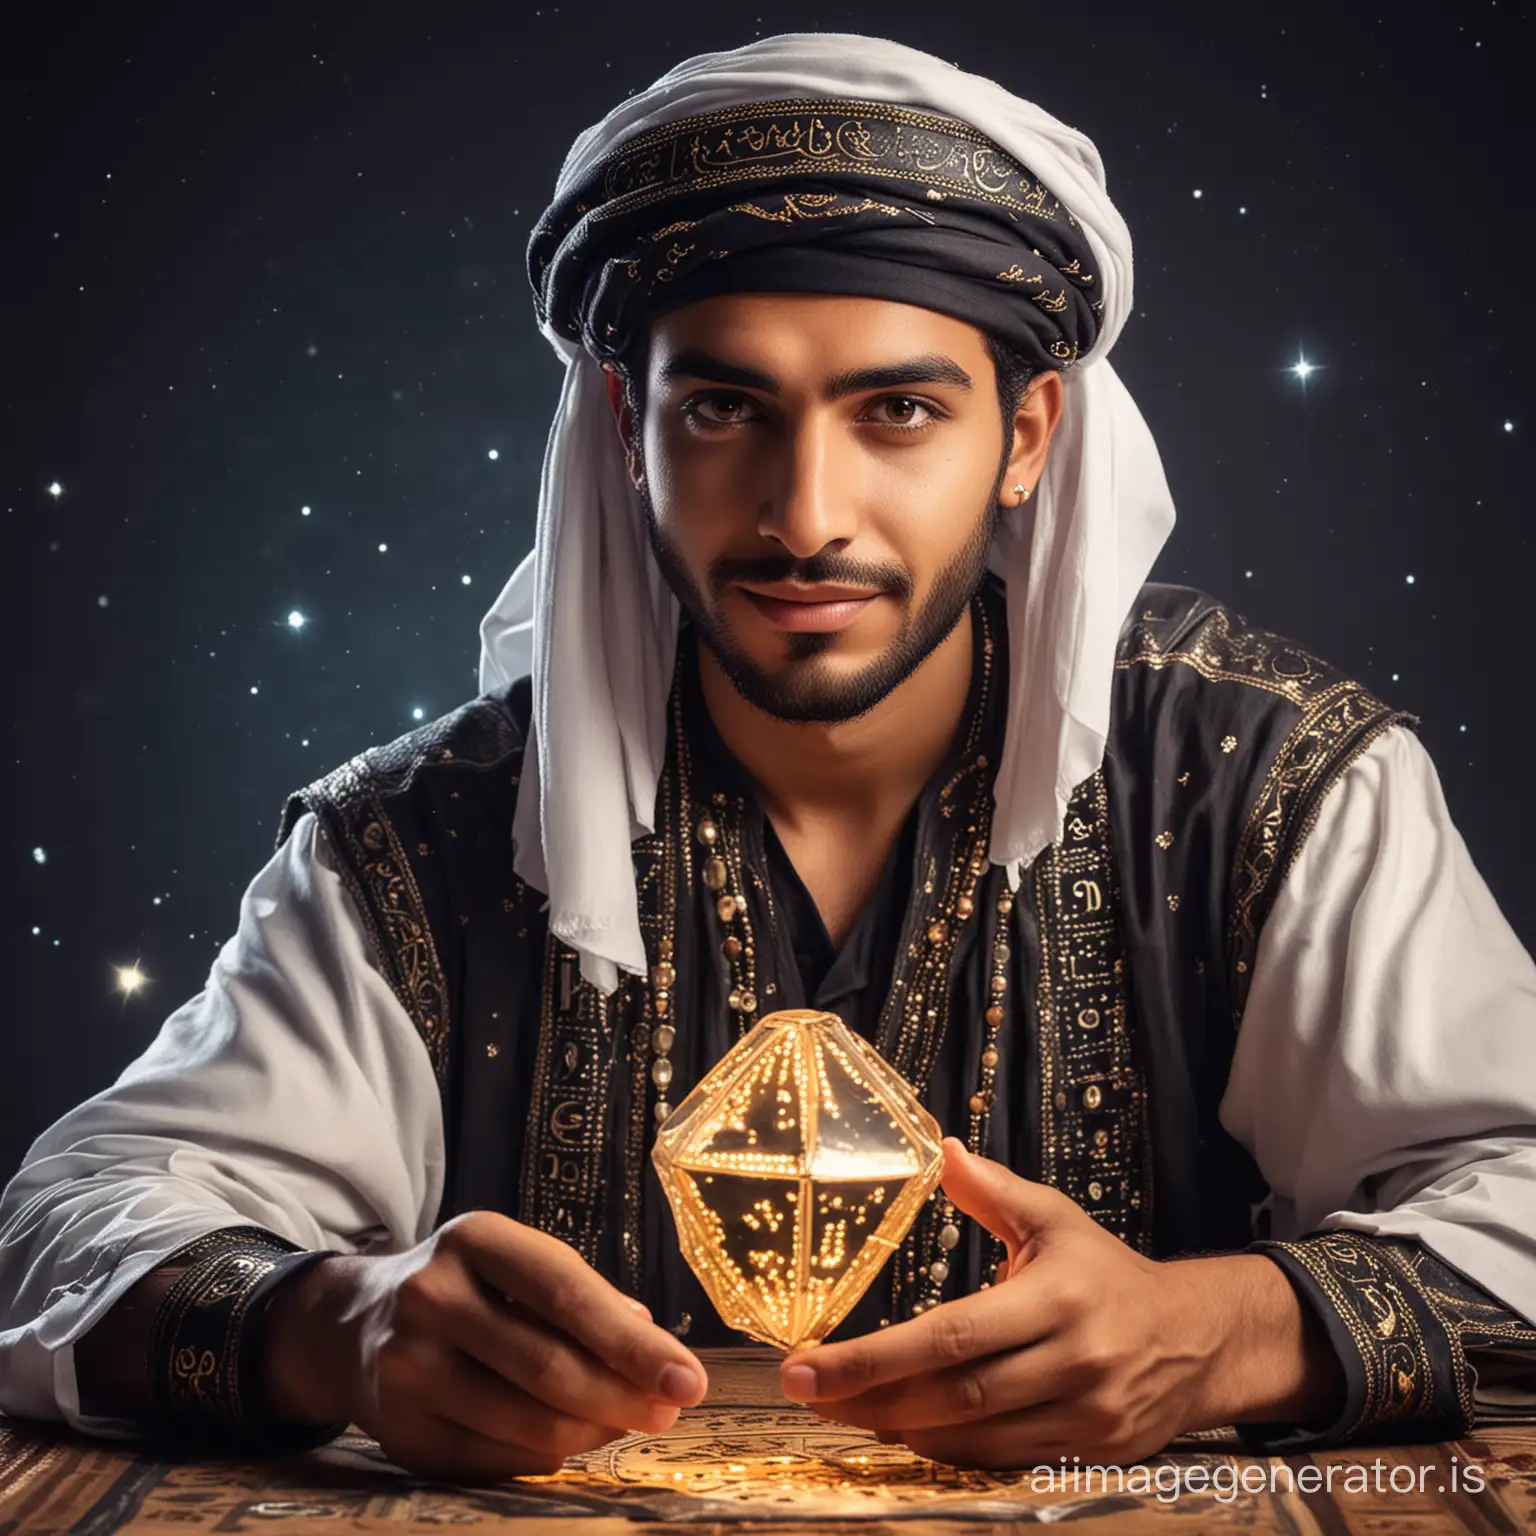 The fortune teller is an Arab guy, the most handsome in the world, 12 zodiac signs, astrological universe